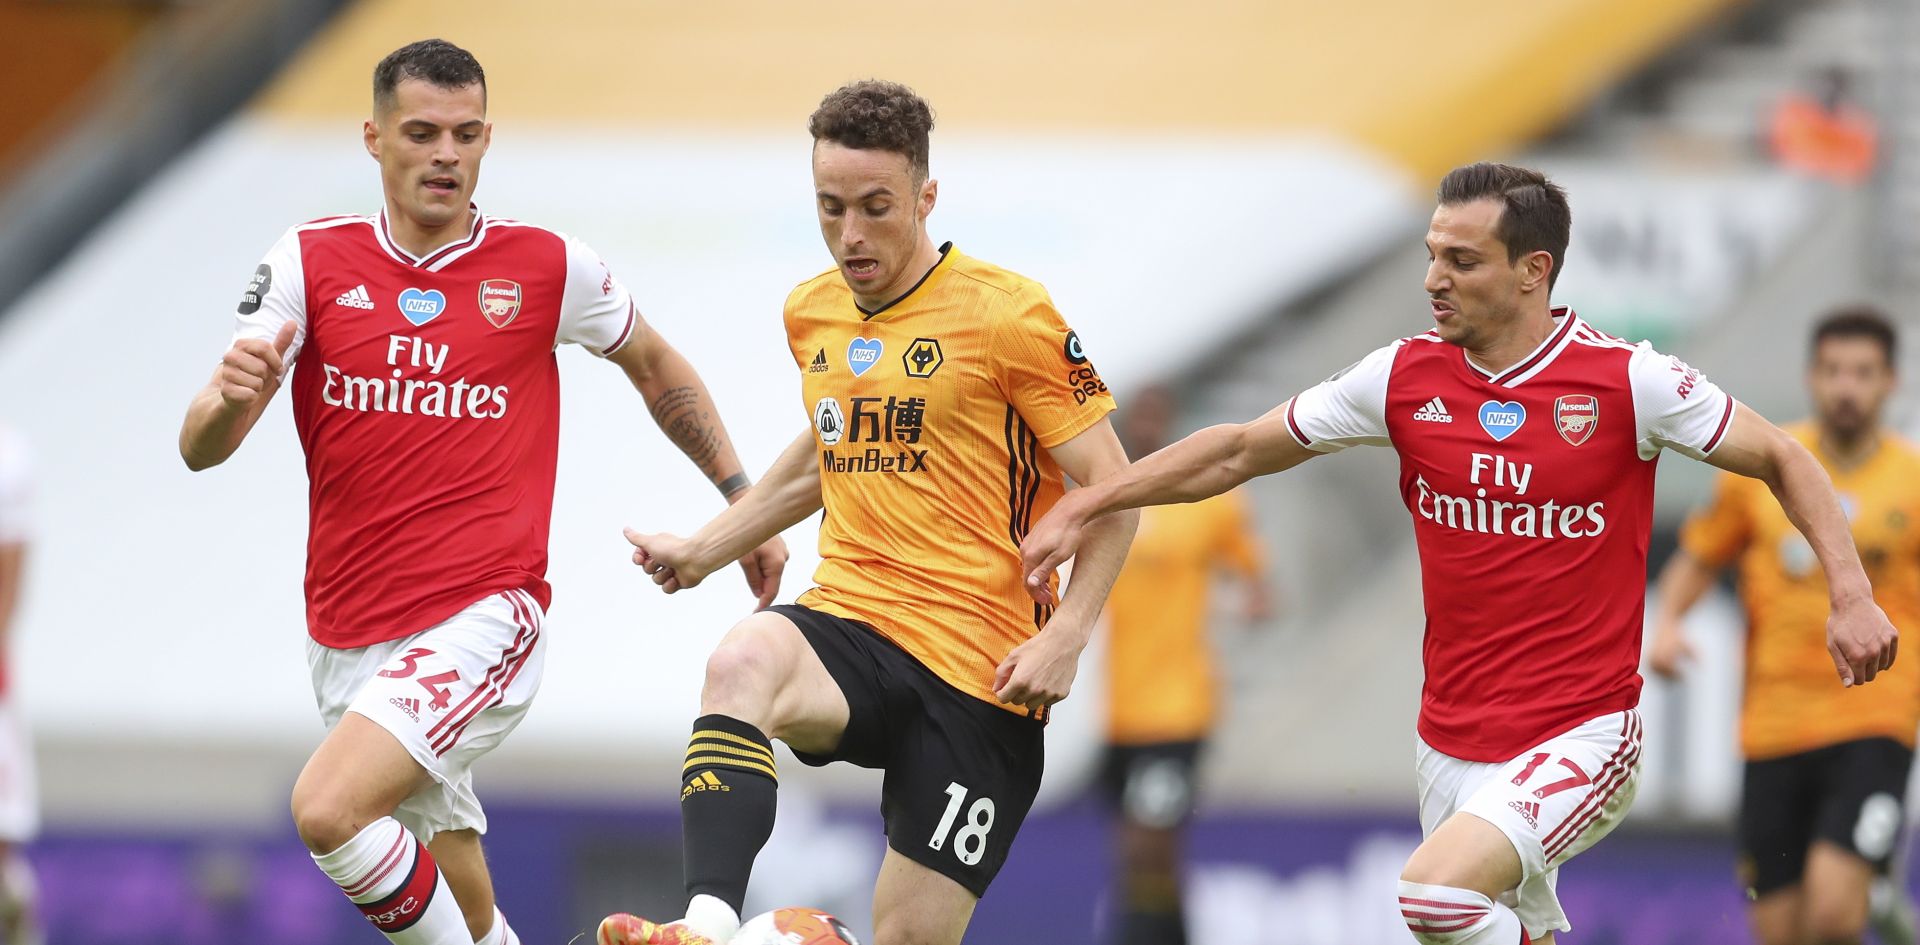 epa08527278 Diogo Jota (C) of Wolverhampton in action against Granit Xhaka (L) and Cedric Soares (R) of Arsenal during the English Premier League match between Wolverhampton Wanderers and Arsenal London in Wolverhampton, Britain, 04 July 2020.  EPA/Cath Ivill/NMC/Pool EDITORIAL USE ONLY. No use with unauthorized audio, video, data, fixture lists, club/league logos or 'live' services. Online in-match use limited to 120 images, no video emulation. No use in betting, games or single club/league/player publications.